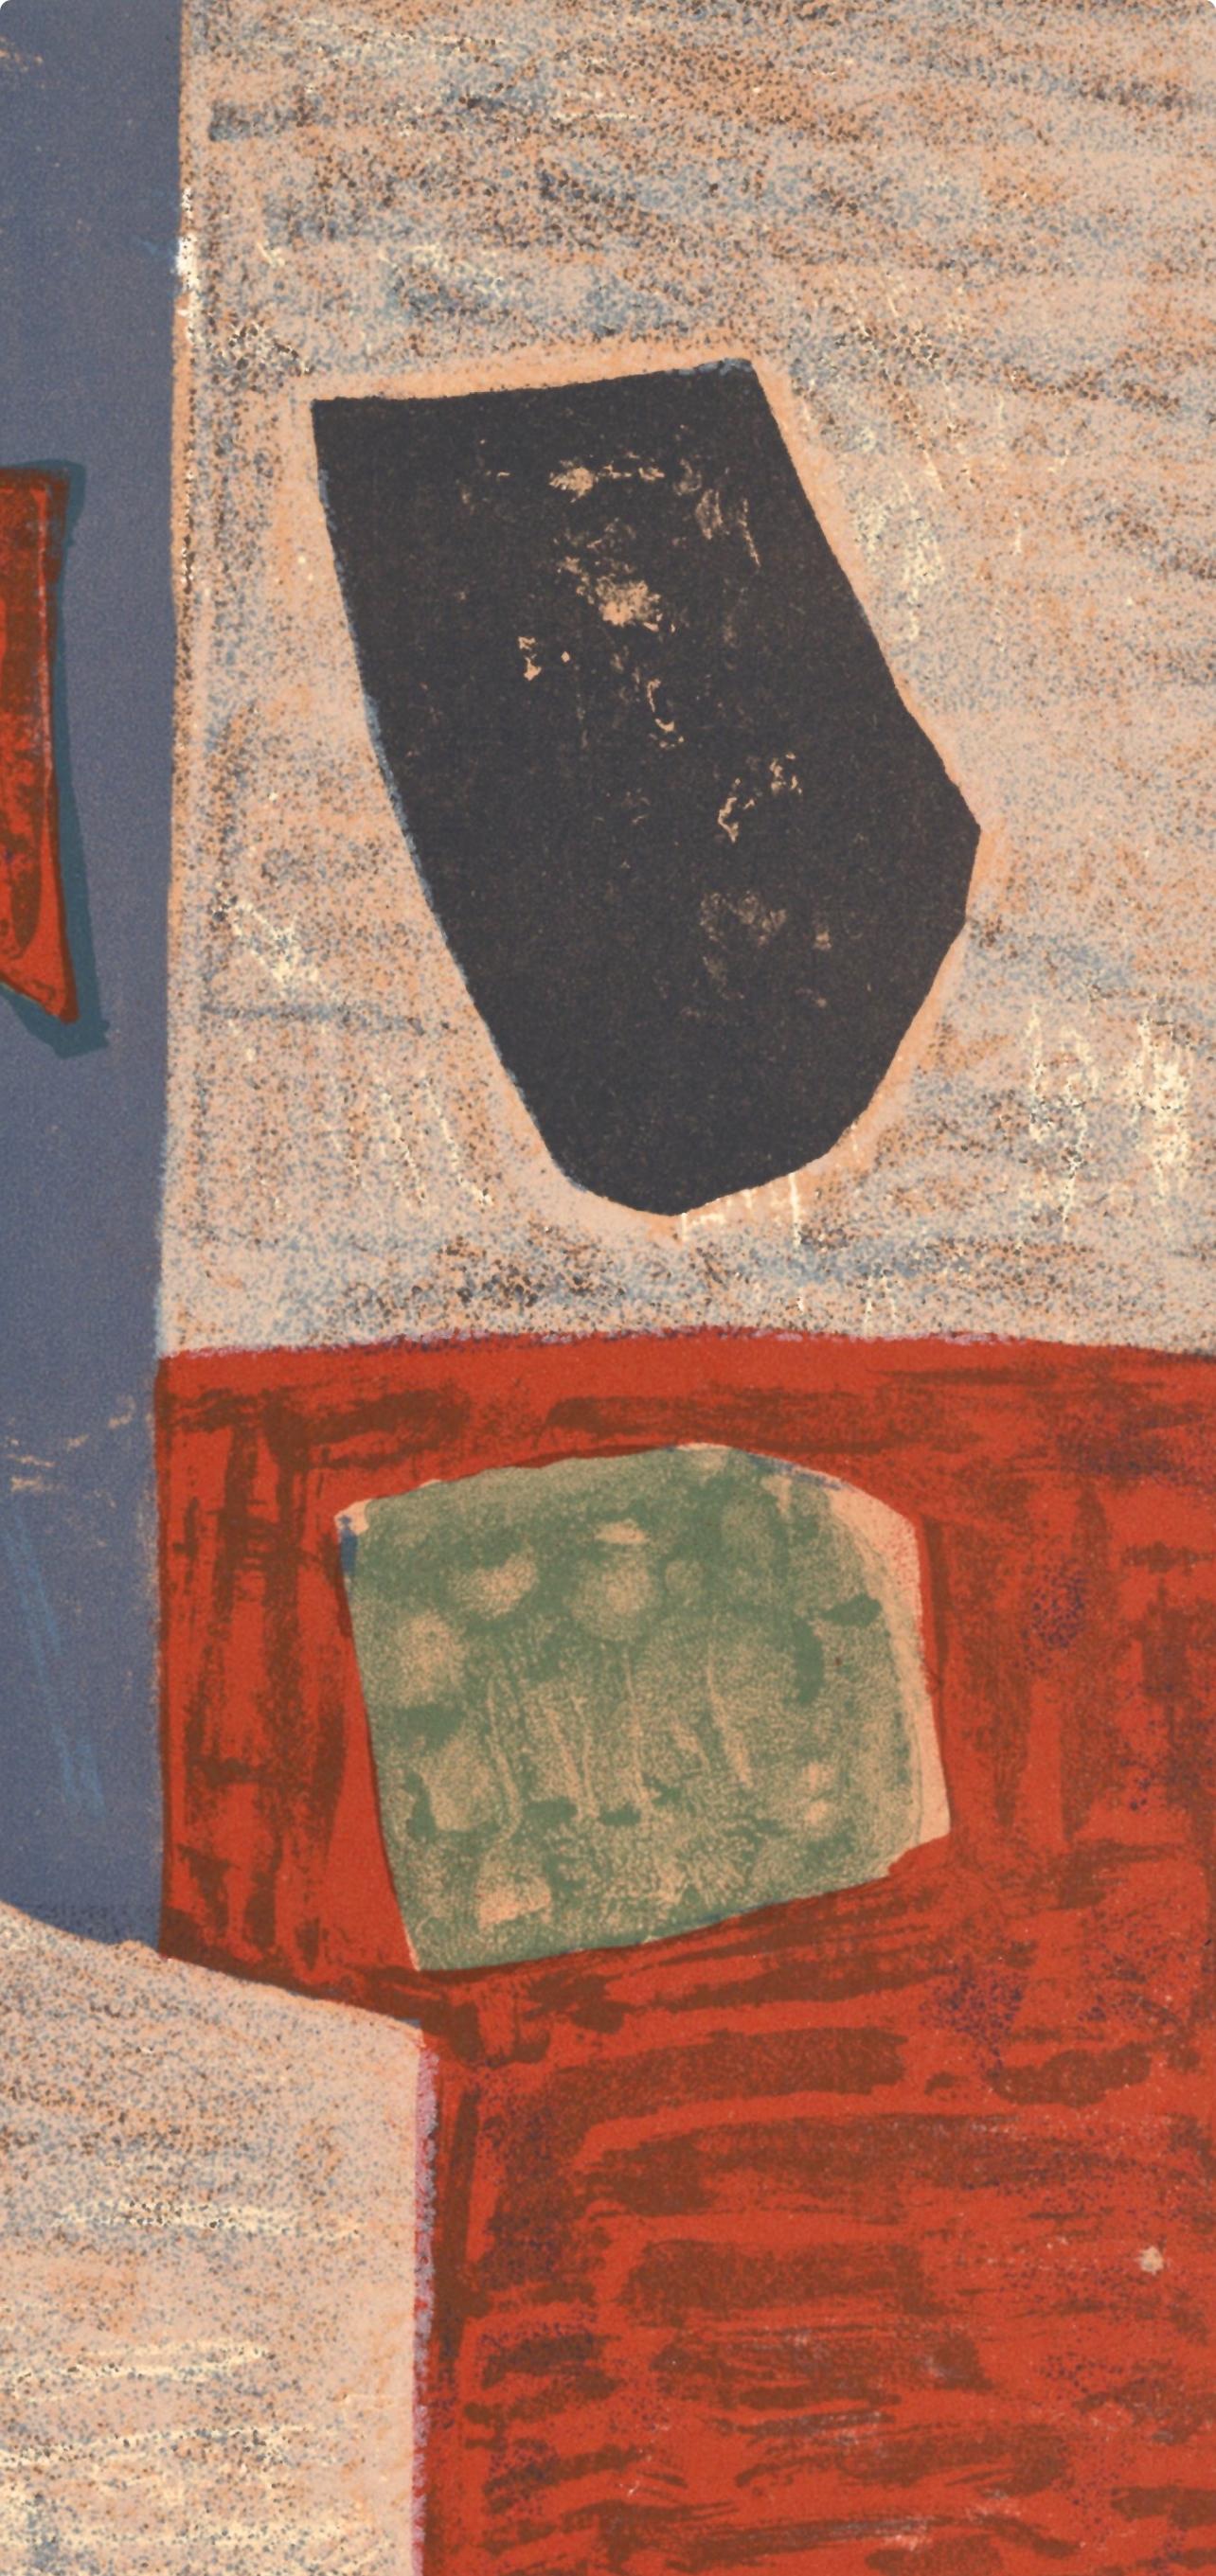 Poliakoff, Composition rose, rouge (Poliakoff/Schneider 17), XXe Siècle (after) - Print by Serge Poliakoff